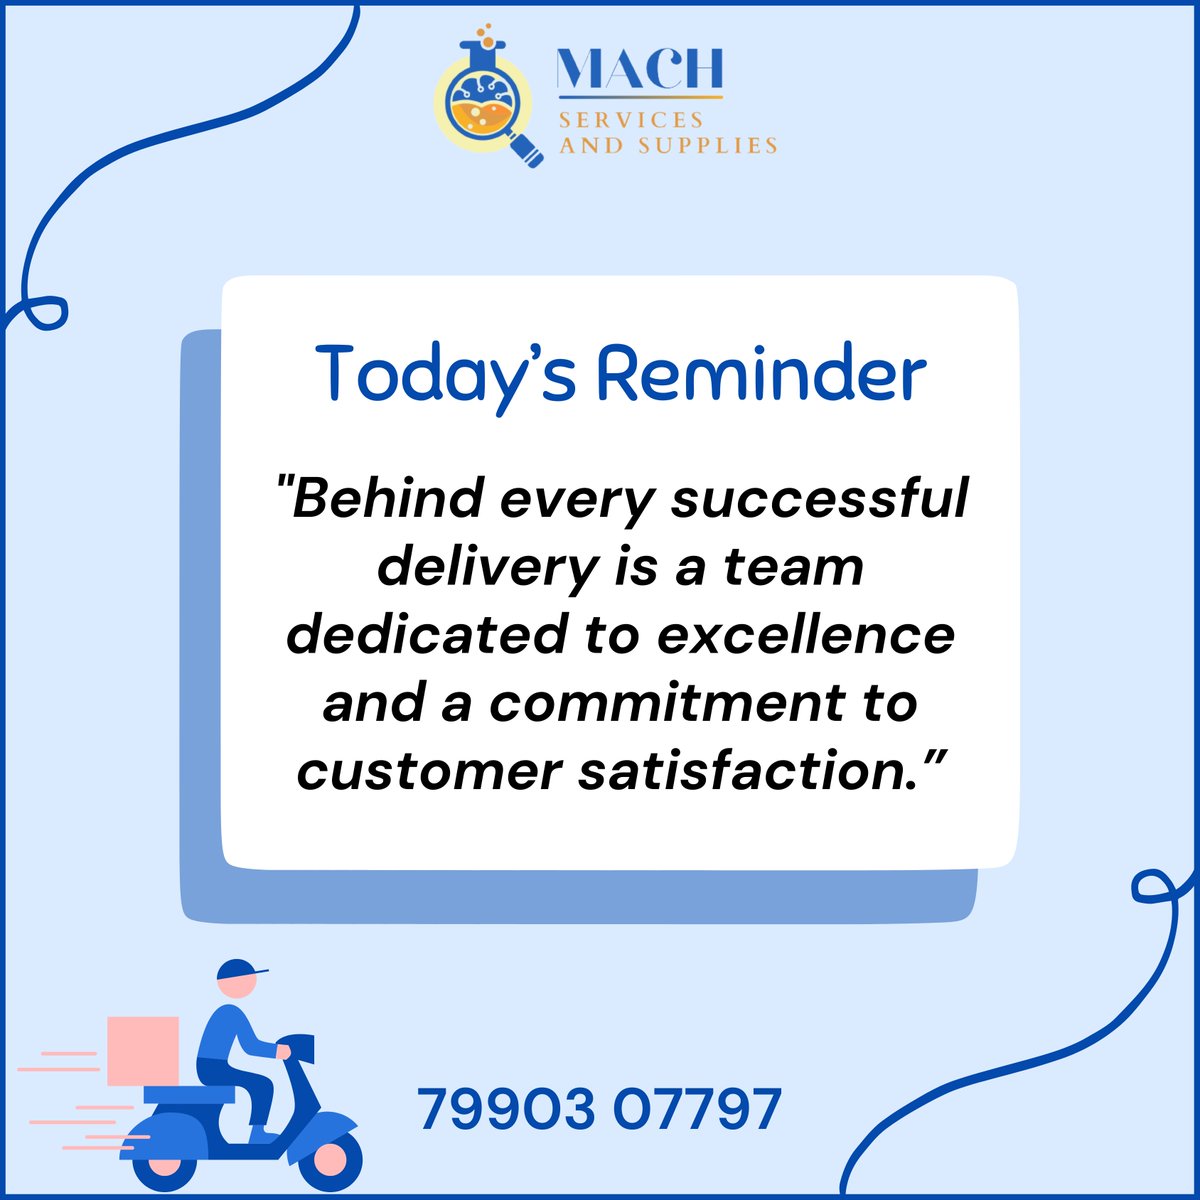 Today's Reminder.
.
.
#delivery #machservicesandsupplies #machservices #deliveryservice #style #love #instagood #like #photography #motivation #motivationalquotes #inspiration #surat #suratcity #suratfood #suratphotoclub #sunofcitysurat #sürat #wearehiring #india #trending #grow